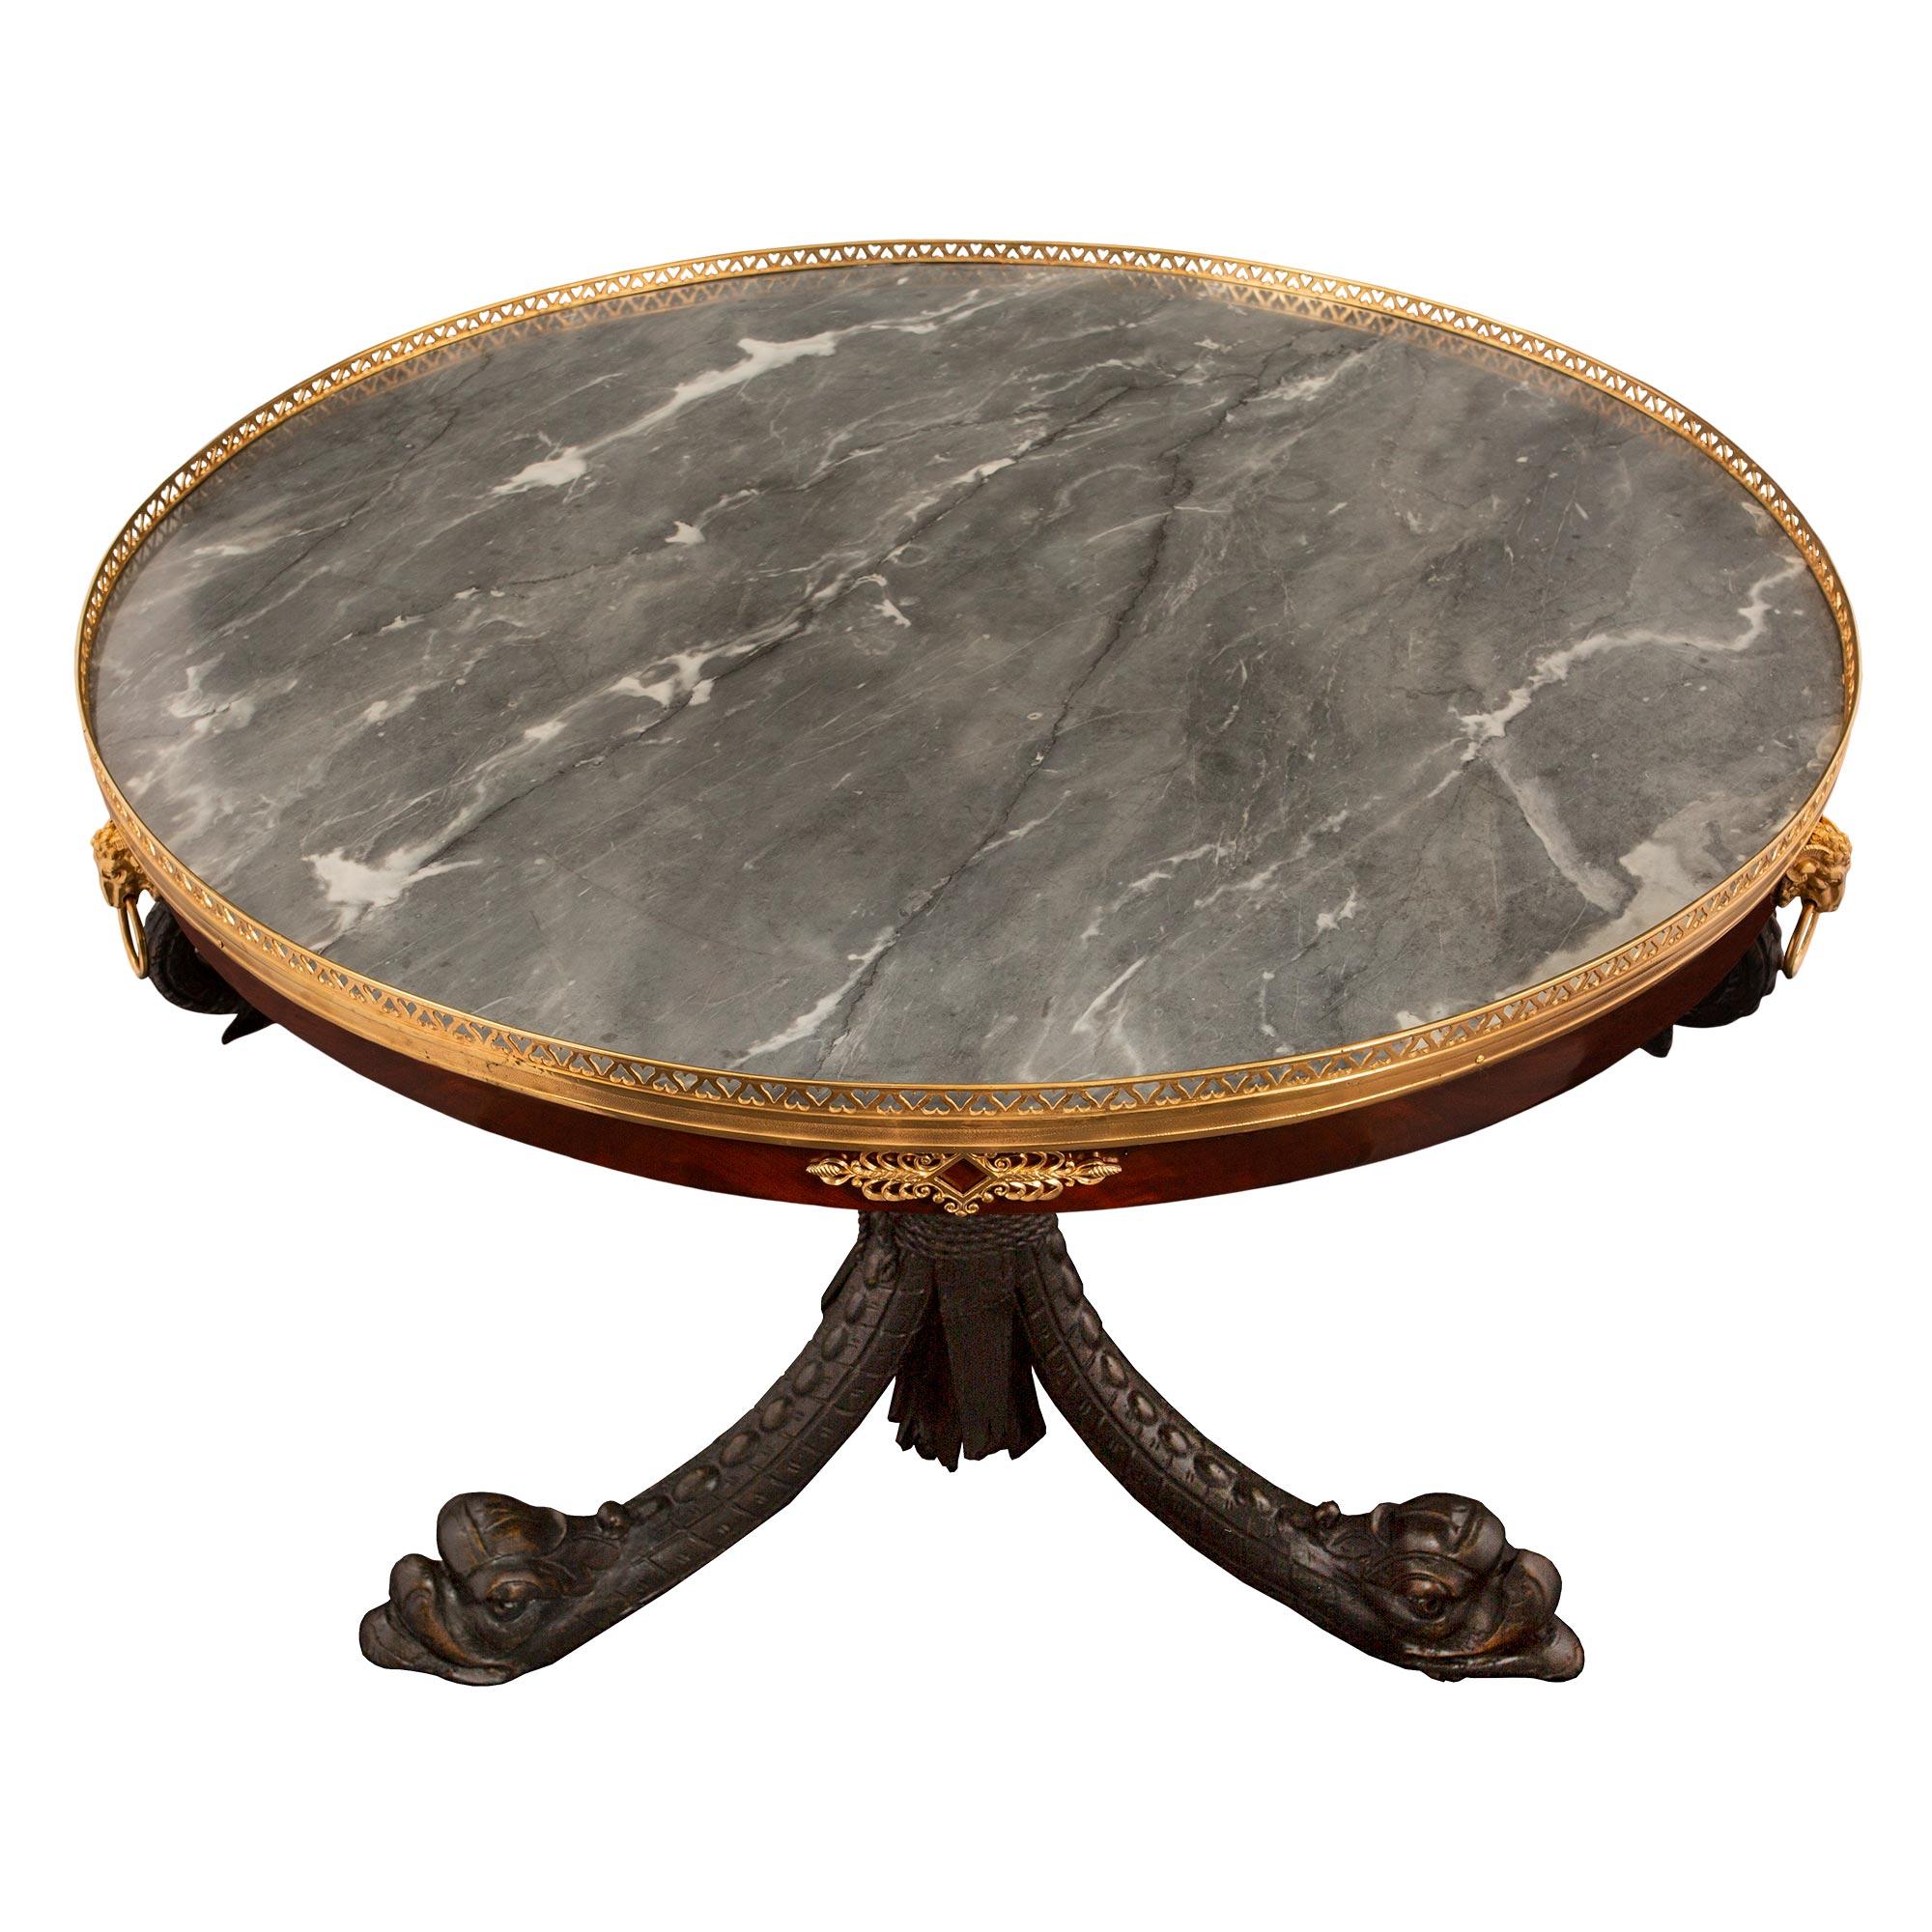 A sensational French 19th century Neo-Classical st. ebonized fruitwood, flamed mahogany, ormolu and marble circular center table, signed Jean Joseph Chapius. The extremely elegant table is raised by its original casters and unique richly carved